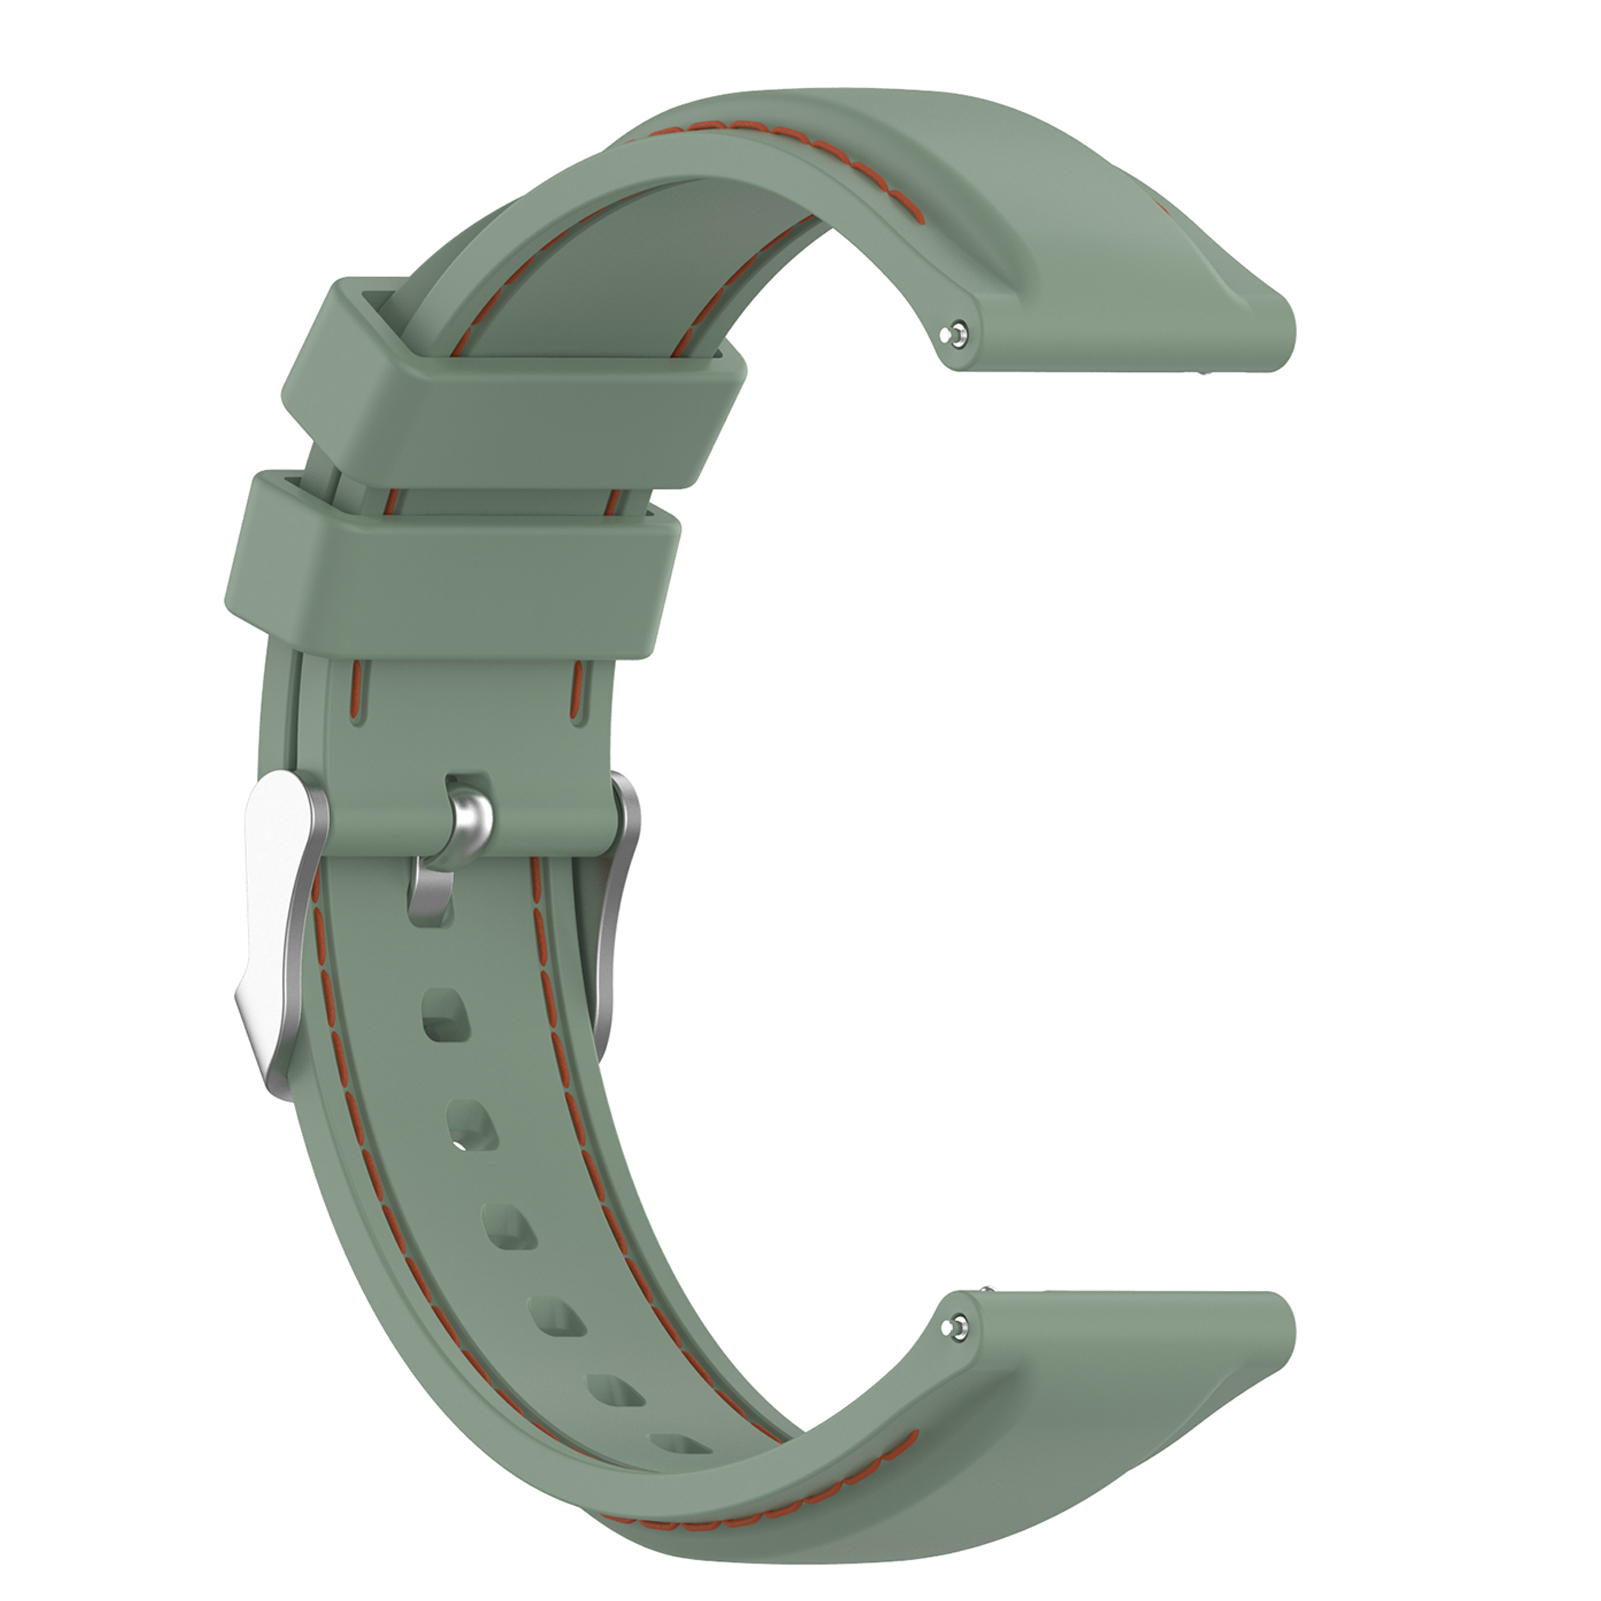 22mm-Soft-Silicone-Watch-Strap-Band-Replacement-Sport-Bracelet-Watchband-For-Ticwatch-Pro3LTE-Haylou-1809083-11